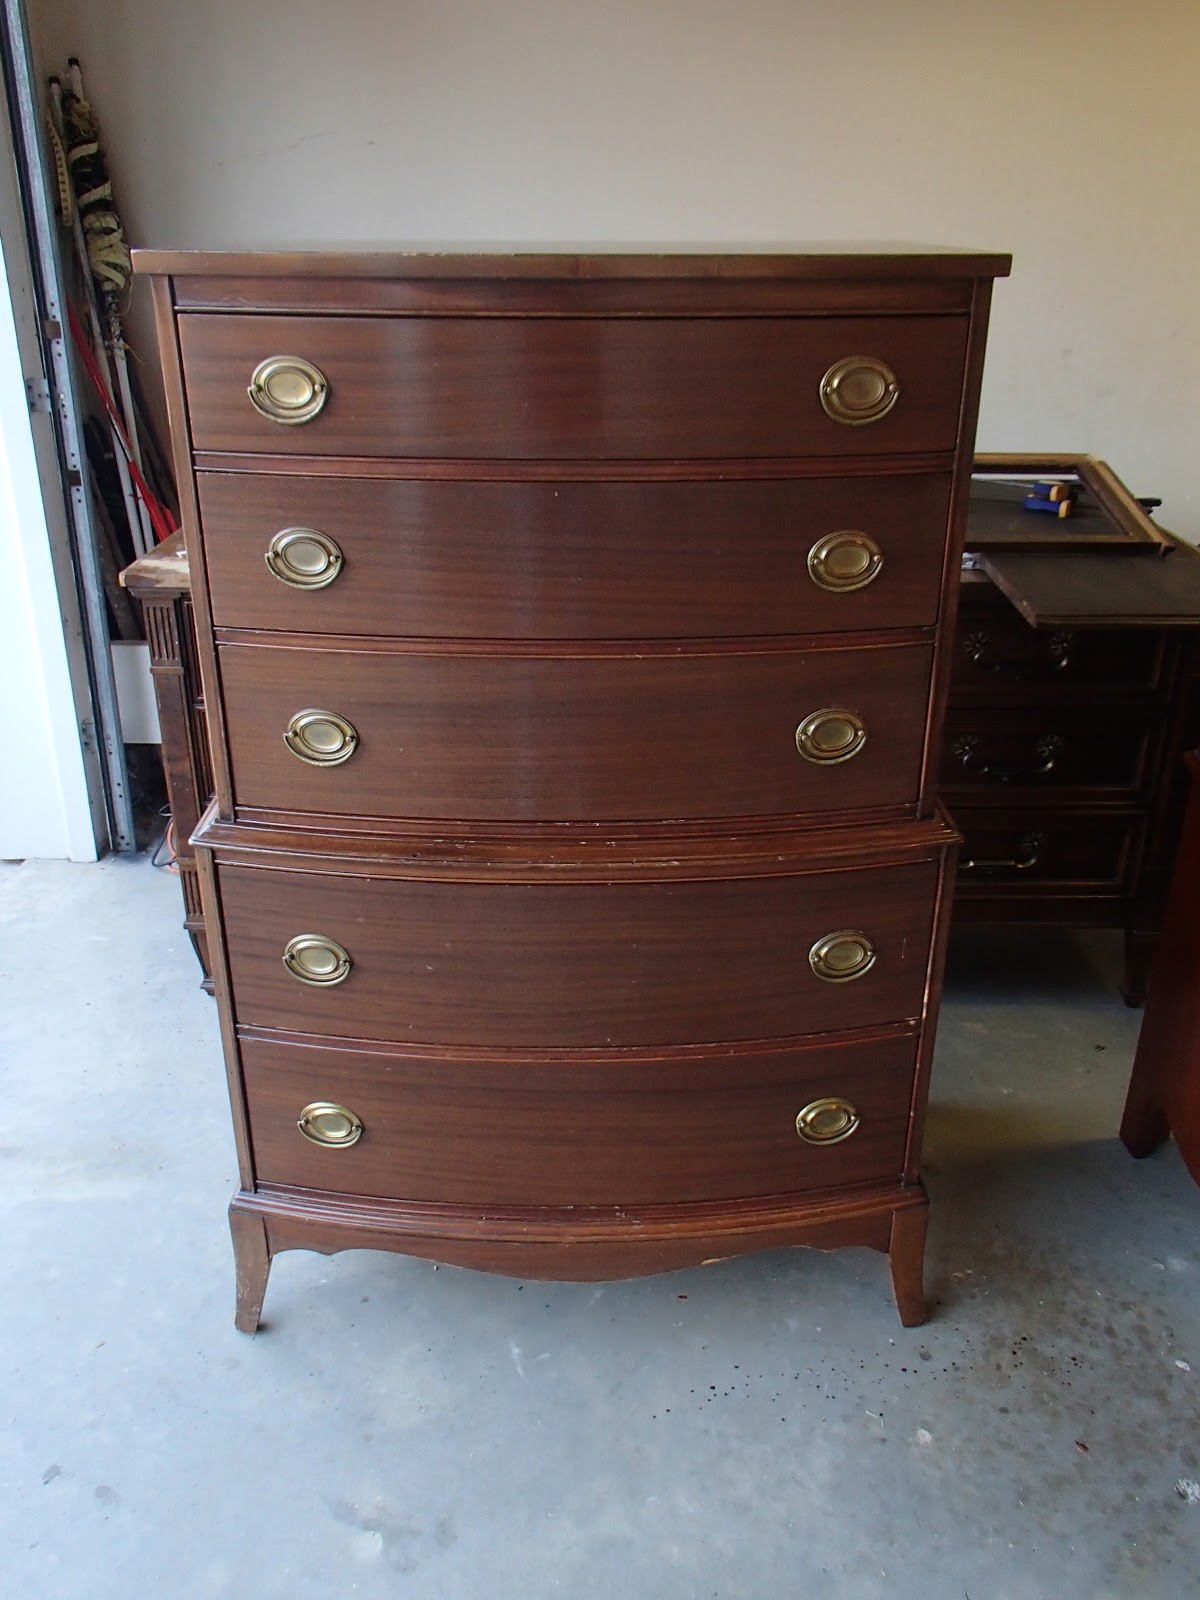 New Again: Old White Antique Chest of Drawers